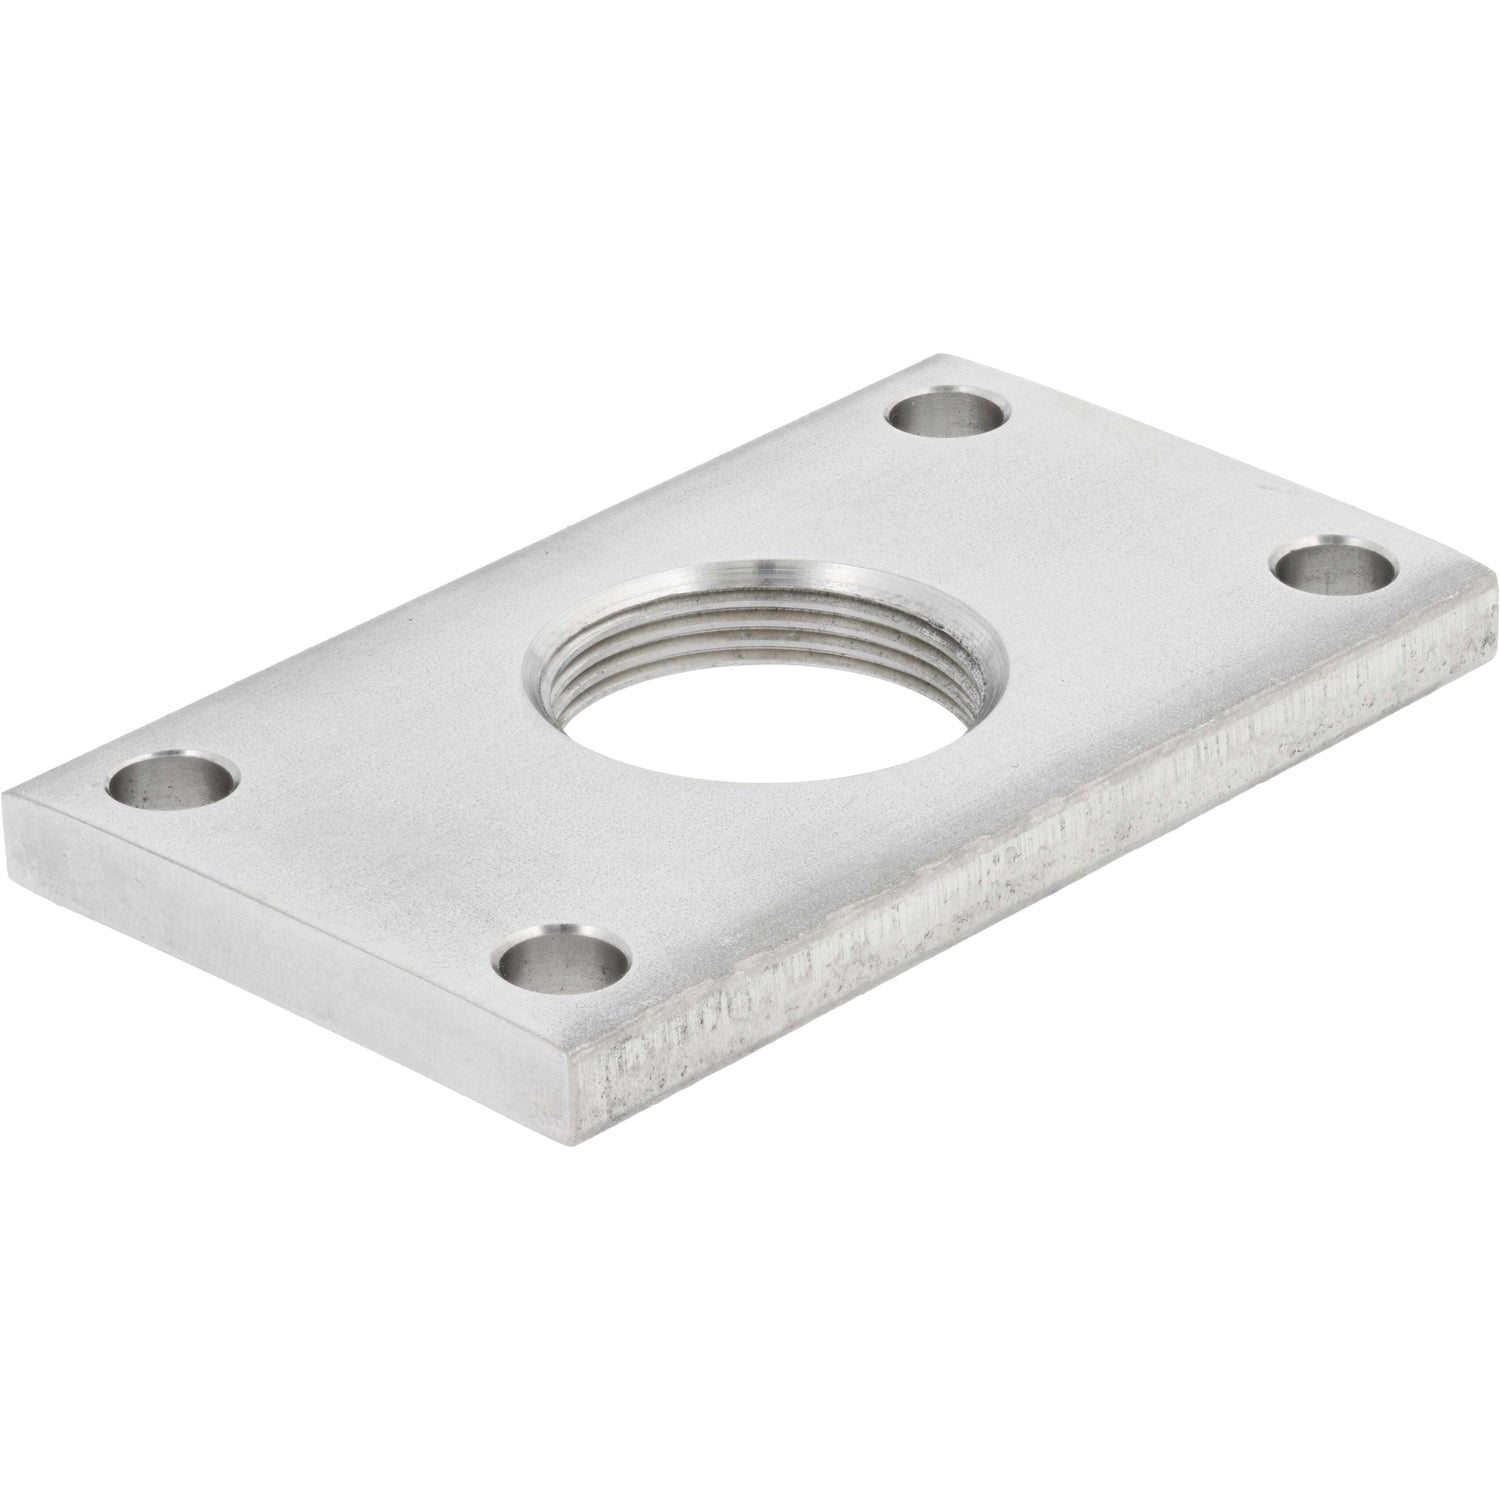 Rectangular stainless steel plate with large threaded center hole and four smaller through holes on each corner. Part shown on white background. 